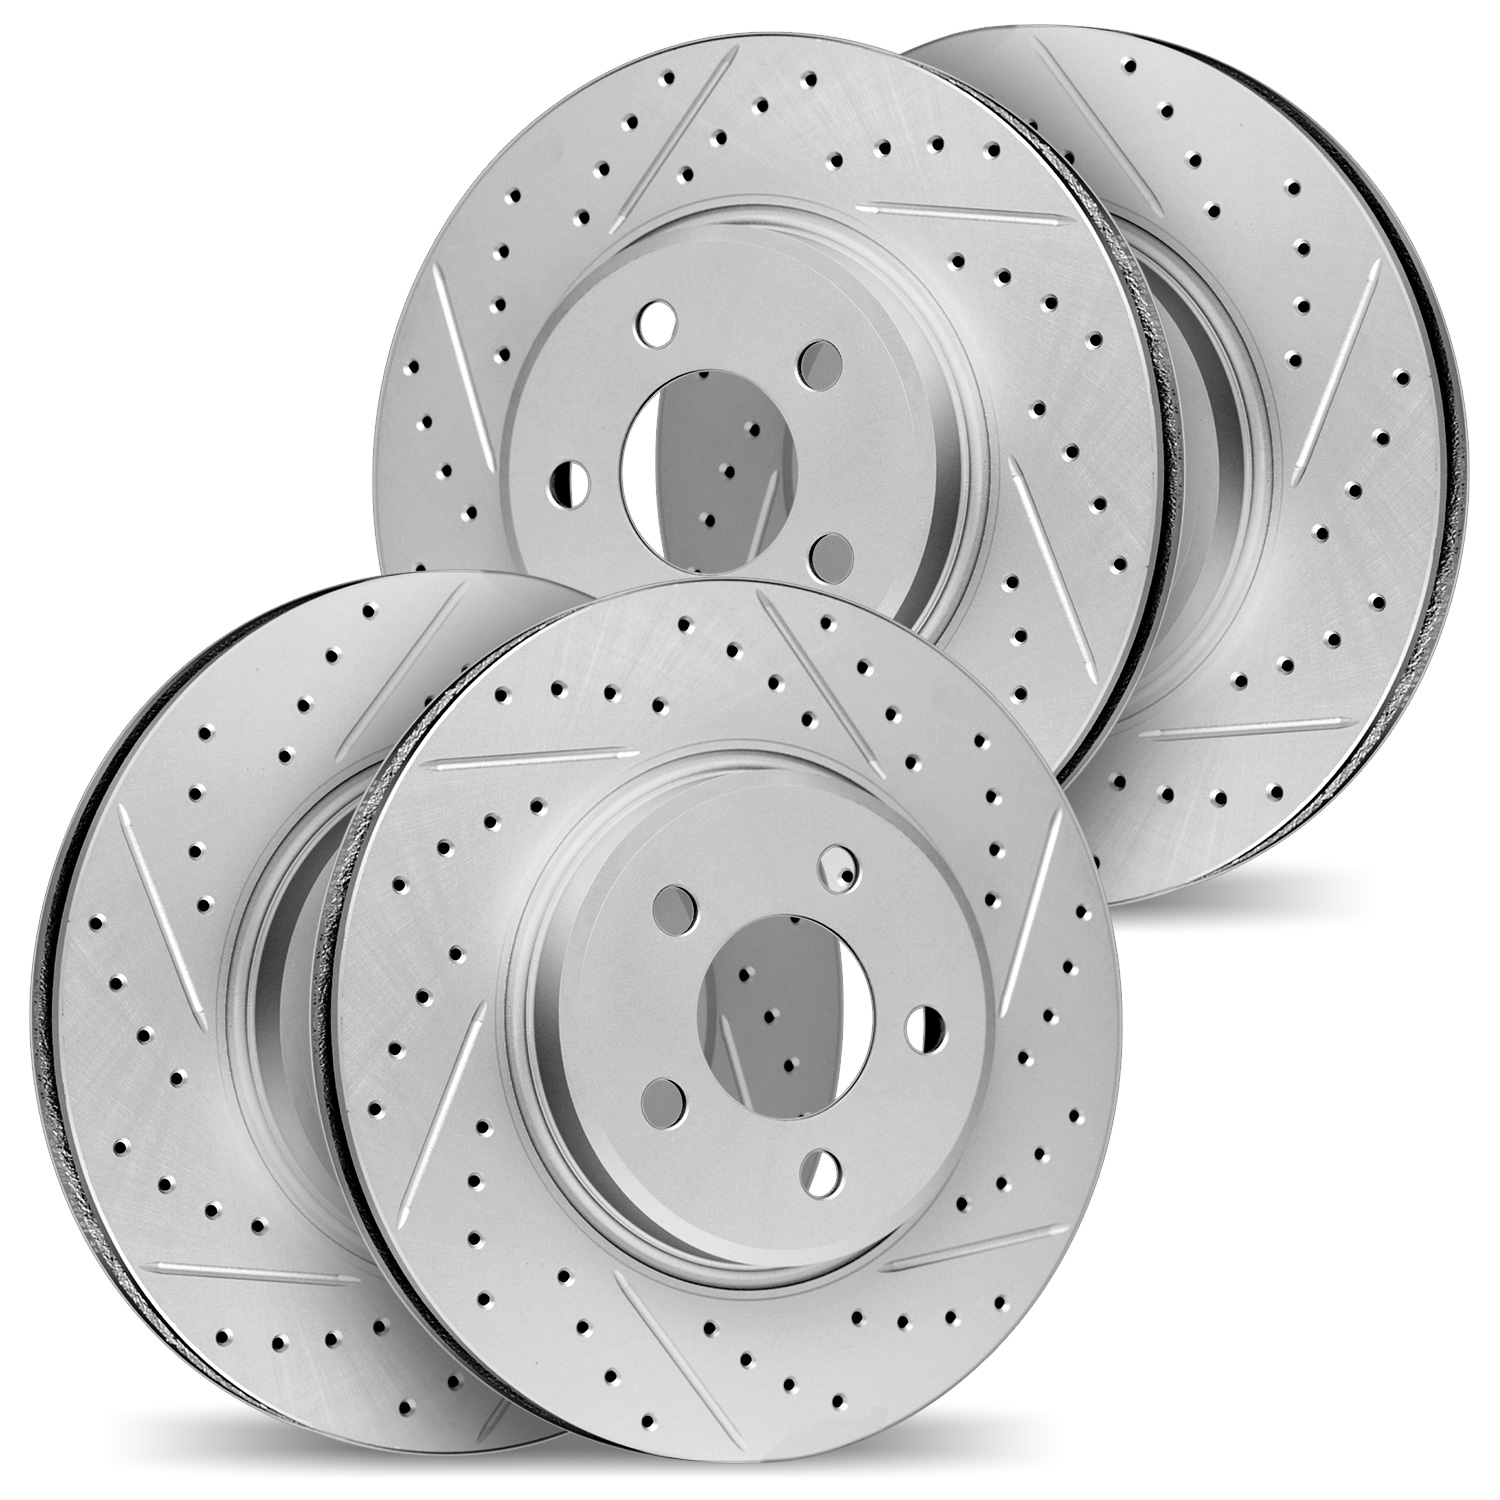 2004-47036 Geoperformance Drilled/Slotted Brake Rotors, 2008-2010 GM, Position: Front and Rear